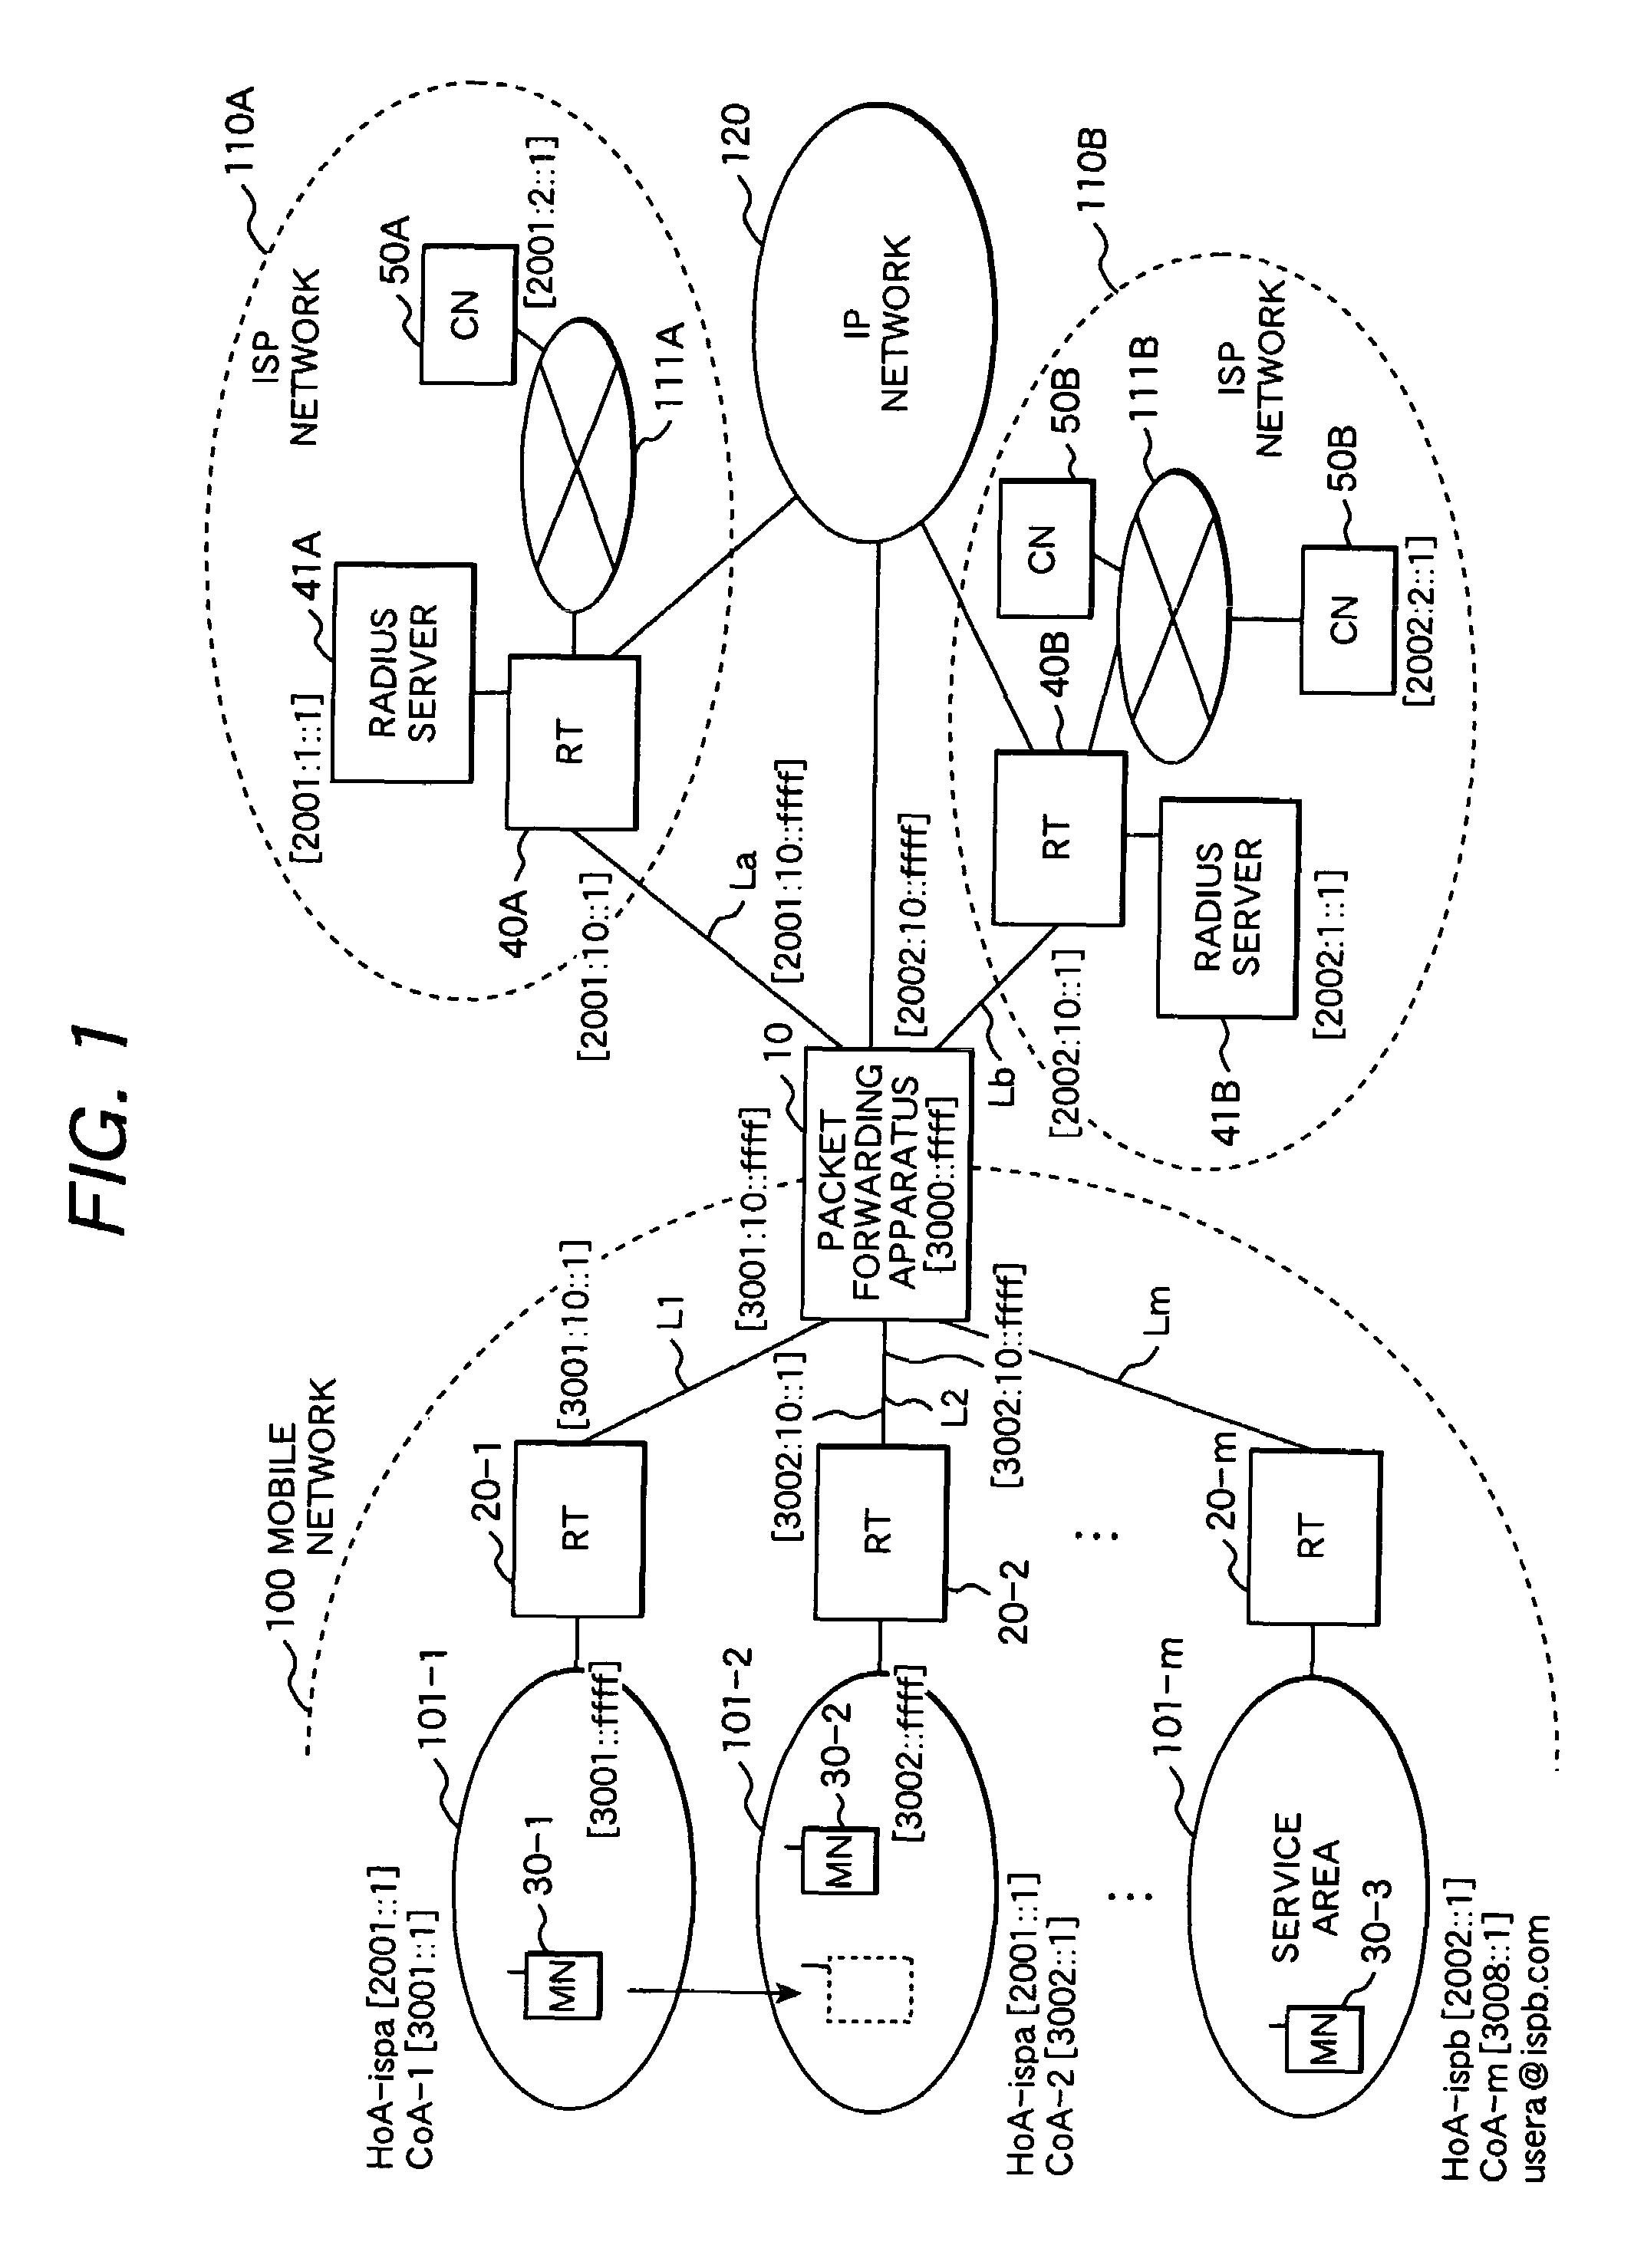 Packet forwarding apparatus for connecting mobile terminal to ISP network